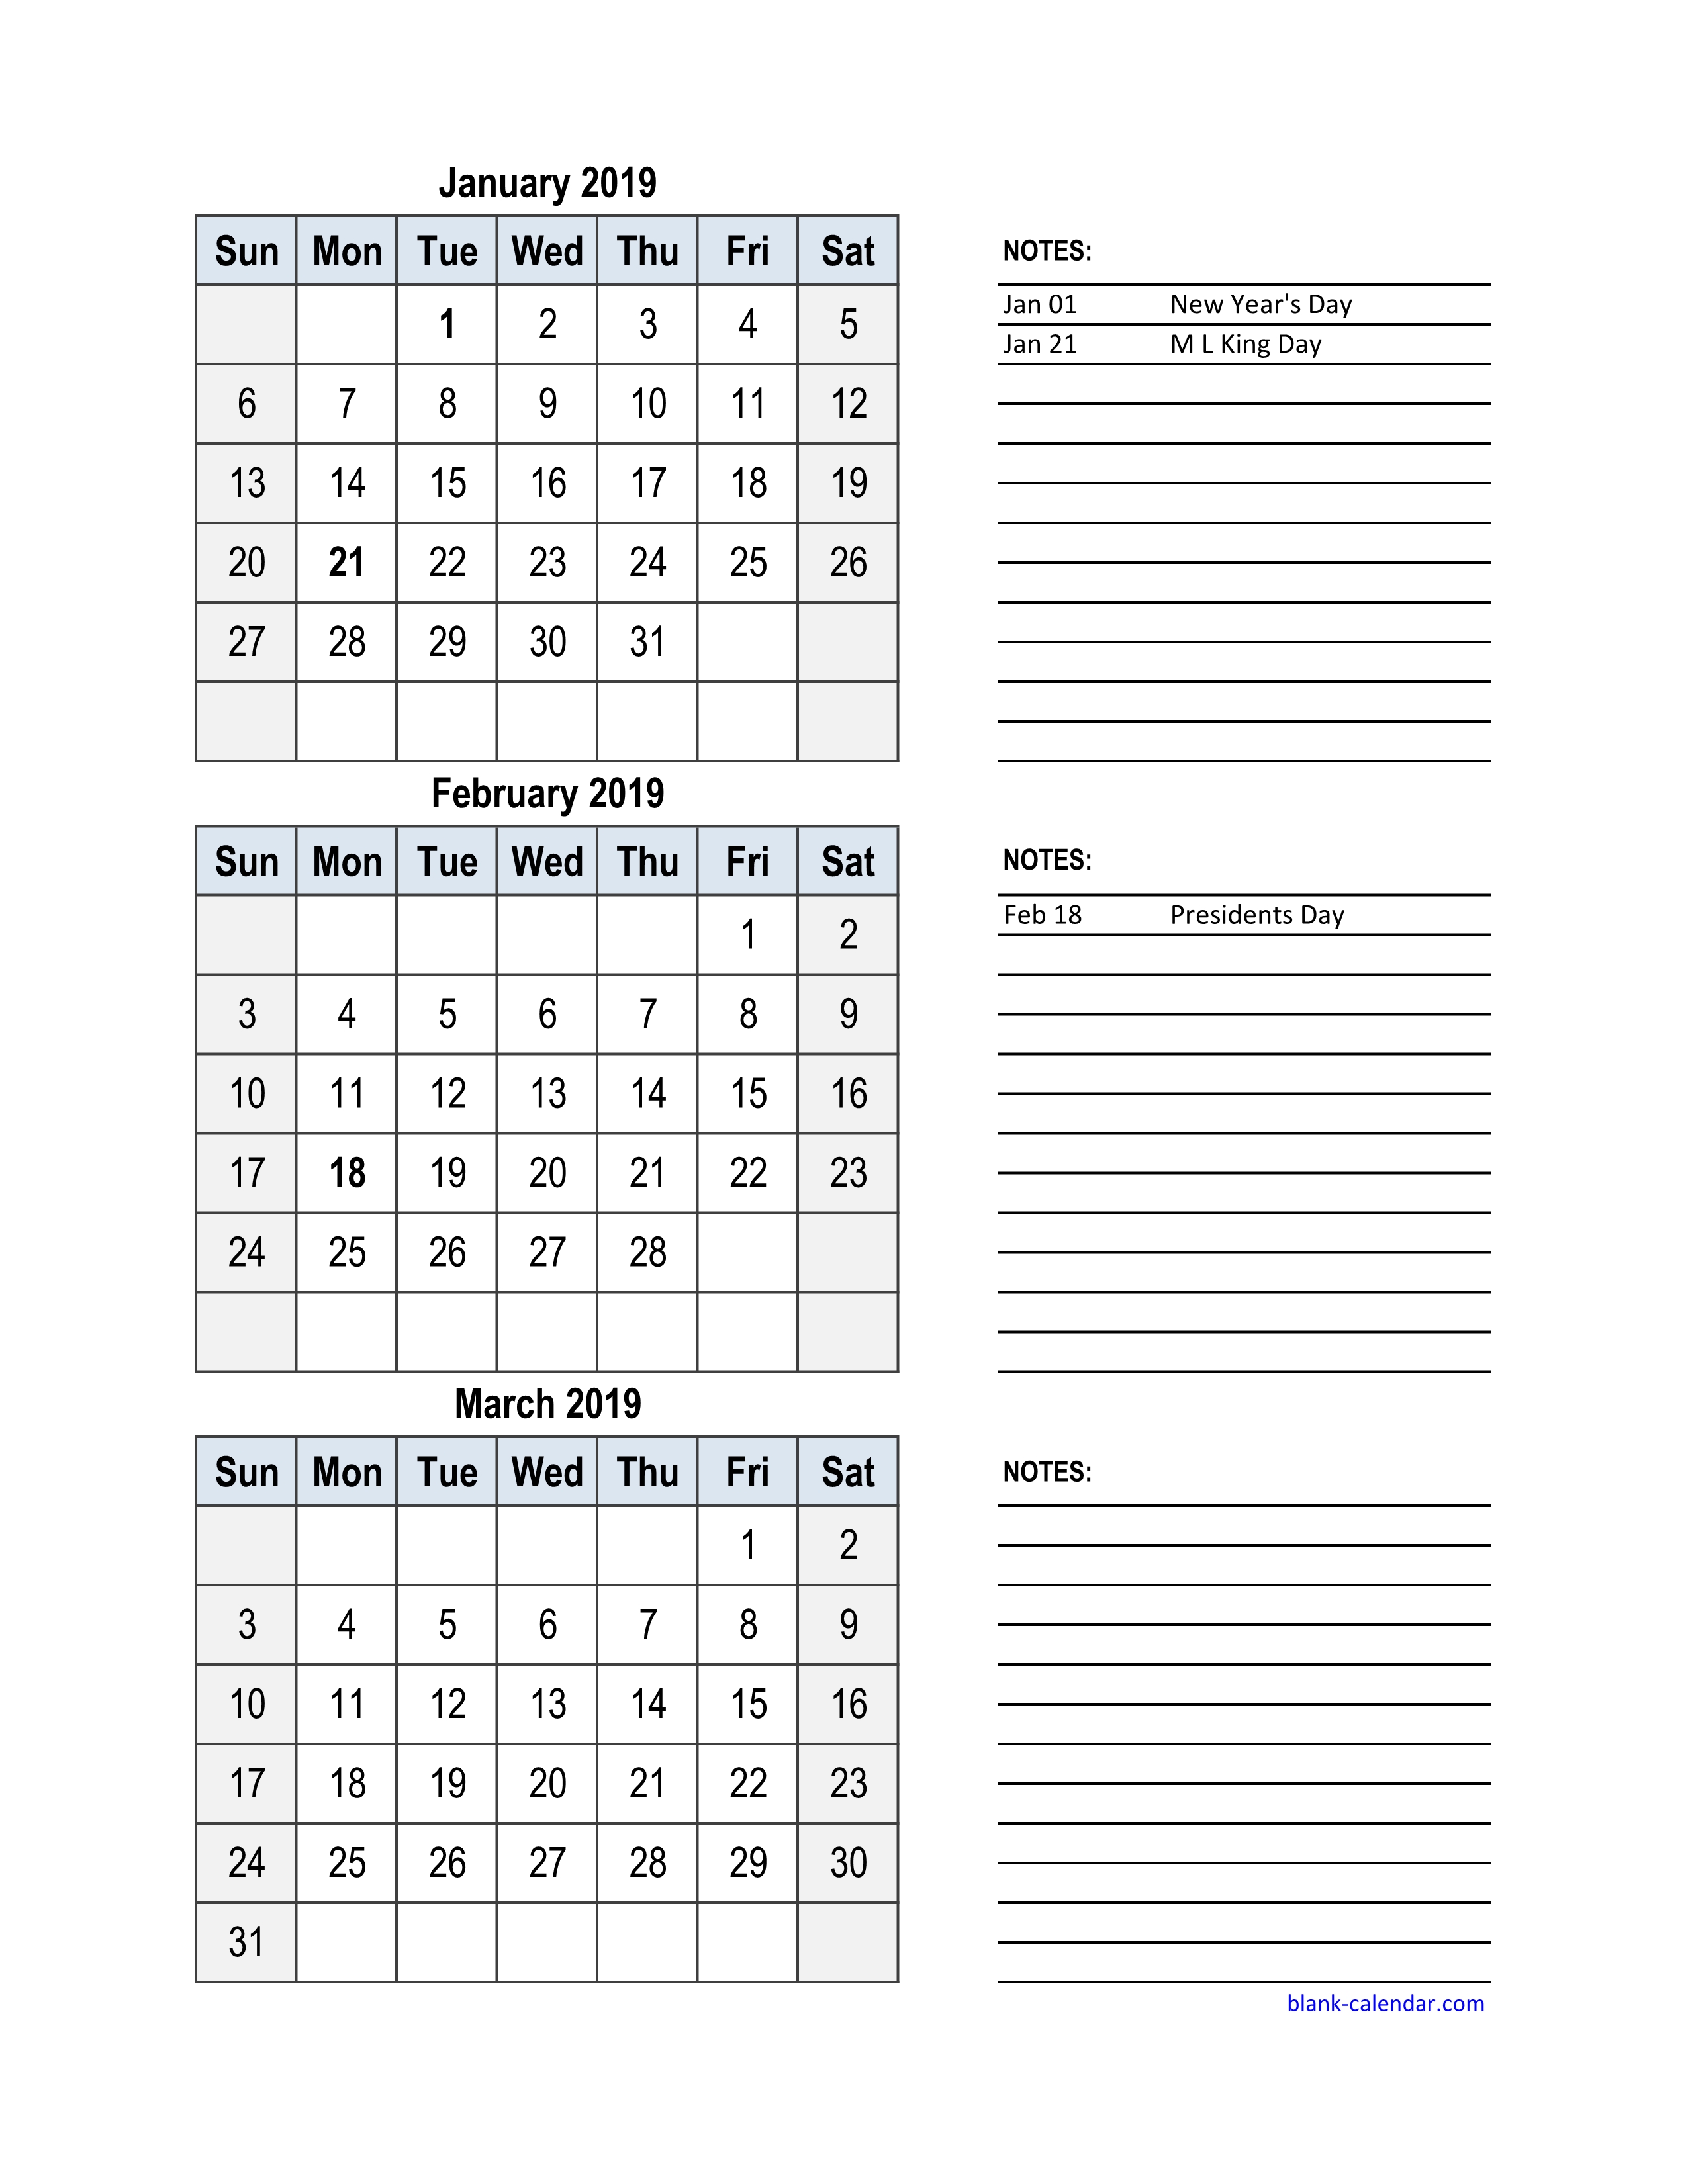 free-download-2019-excel-calendar-3-months-in-one-excel-spreadsheet